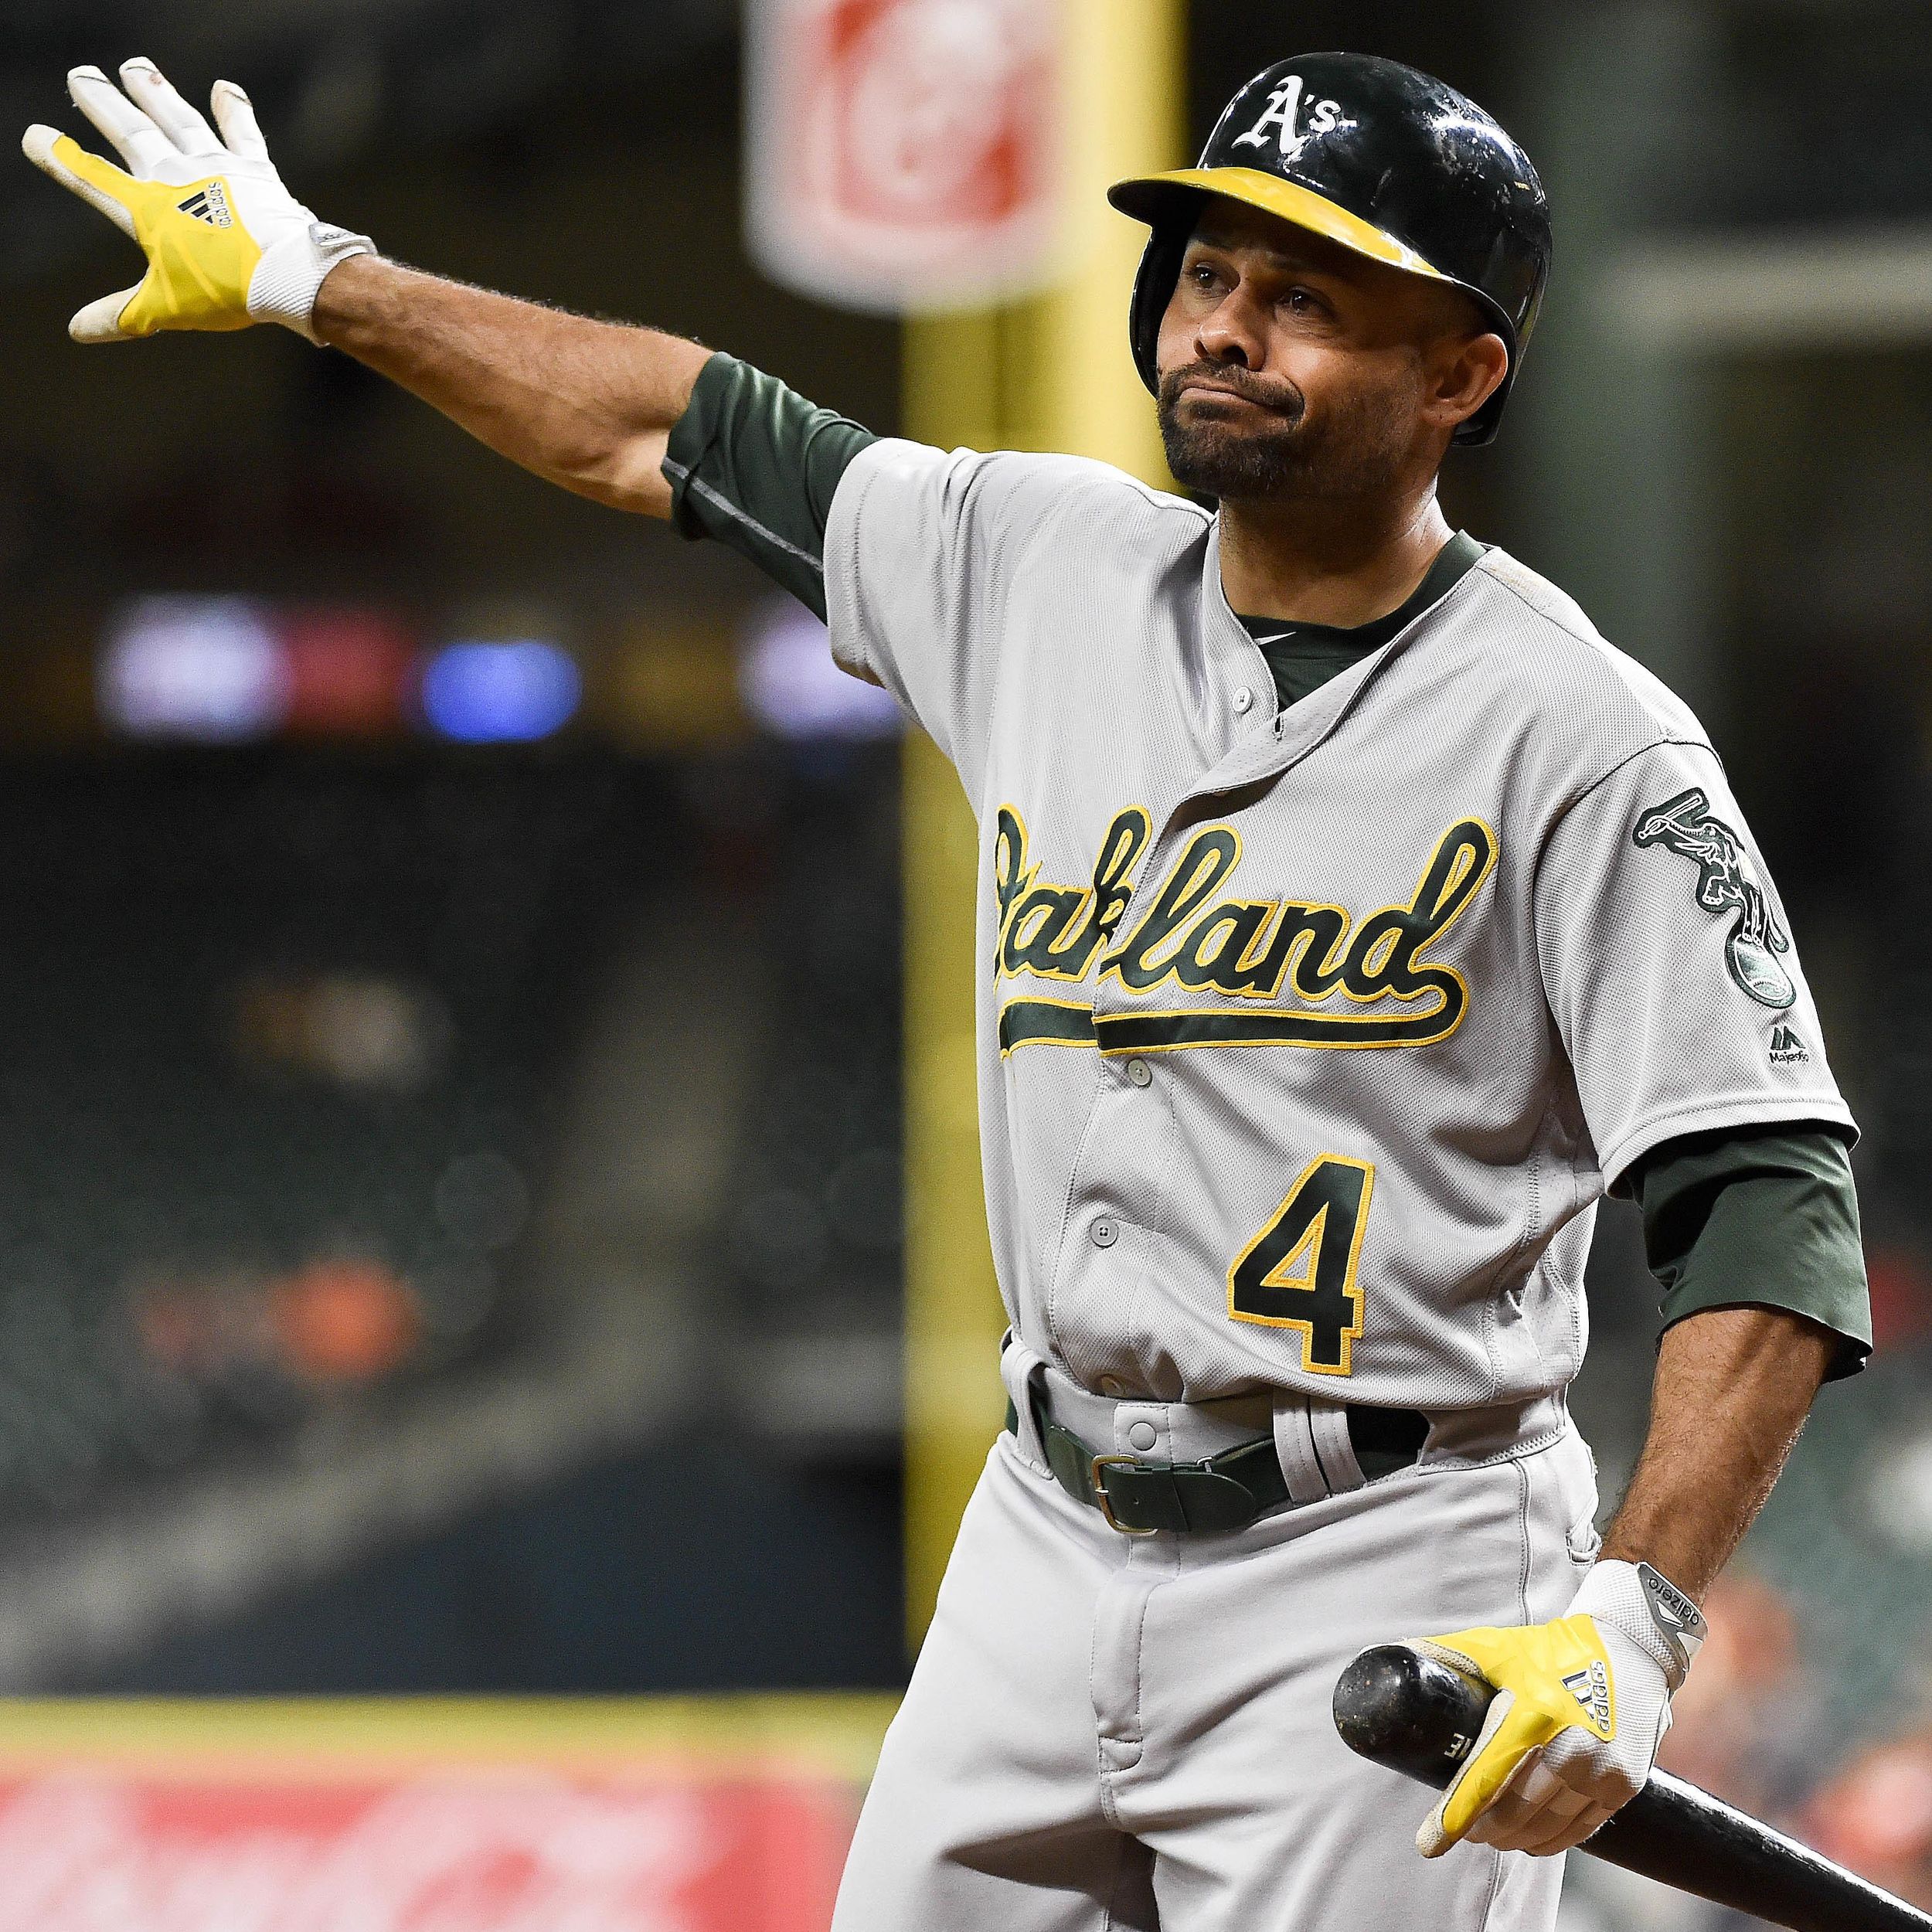 The Oakland A's trading Coco Crisp to the Indians is exactly what